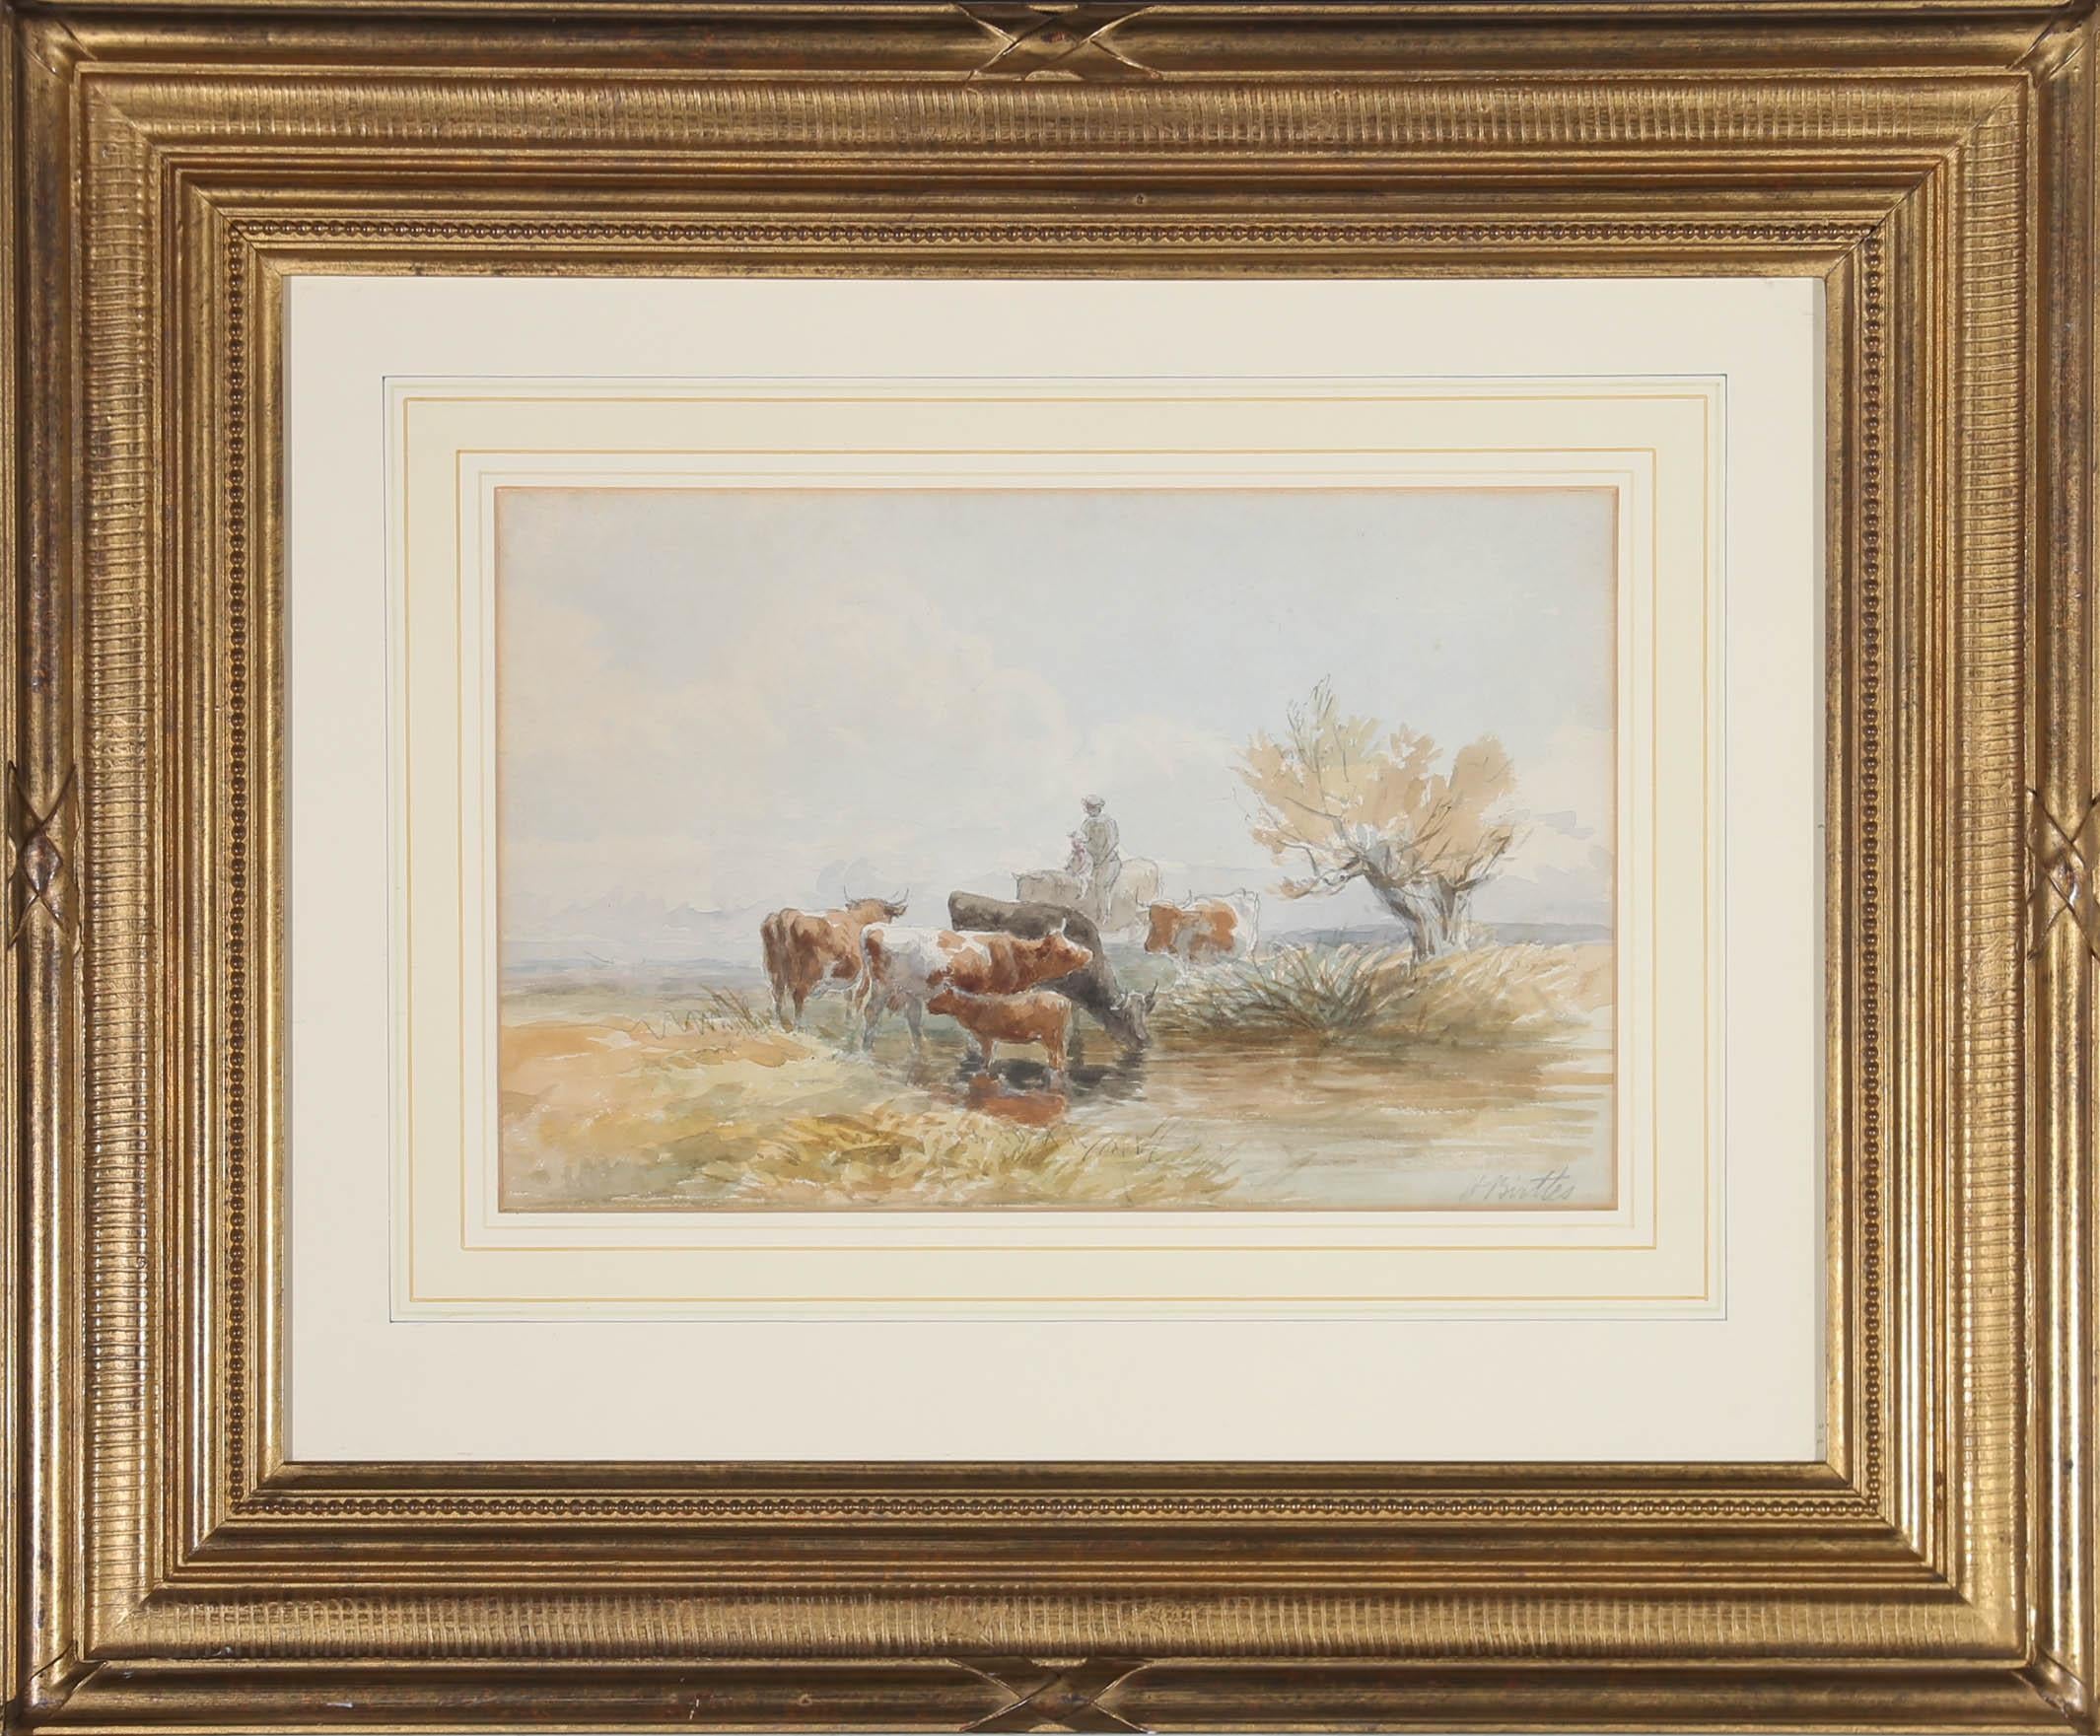 A simplistic watercolour scene with pencil detail attributed to Henry Birtles RA (1838-1907), depicting a small group of cattle drinking from a river, in a vast open landscape. A parent and child can be seen in the centre of the composition mounted